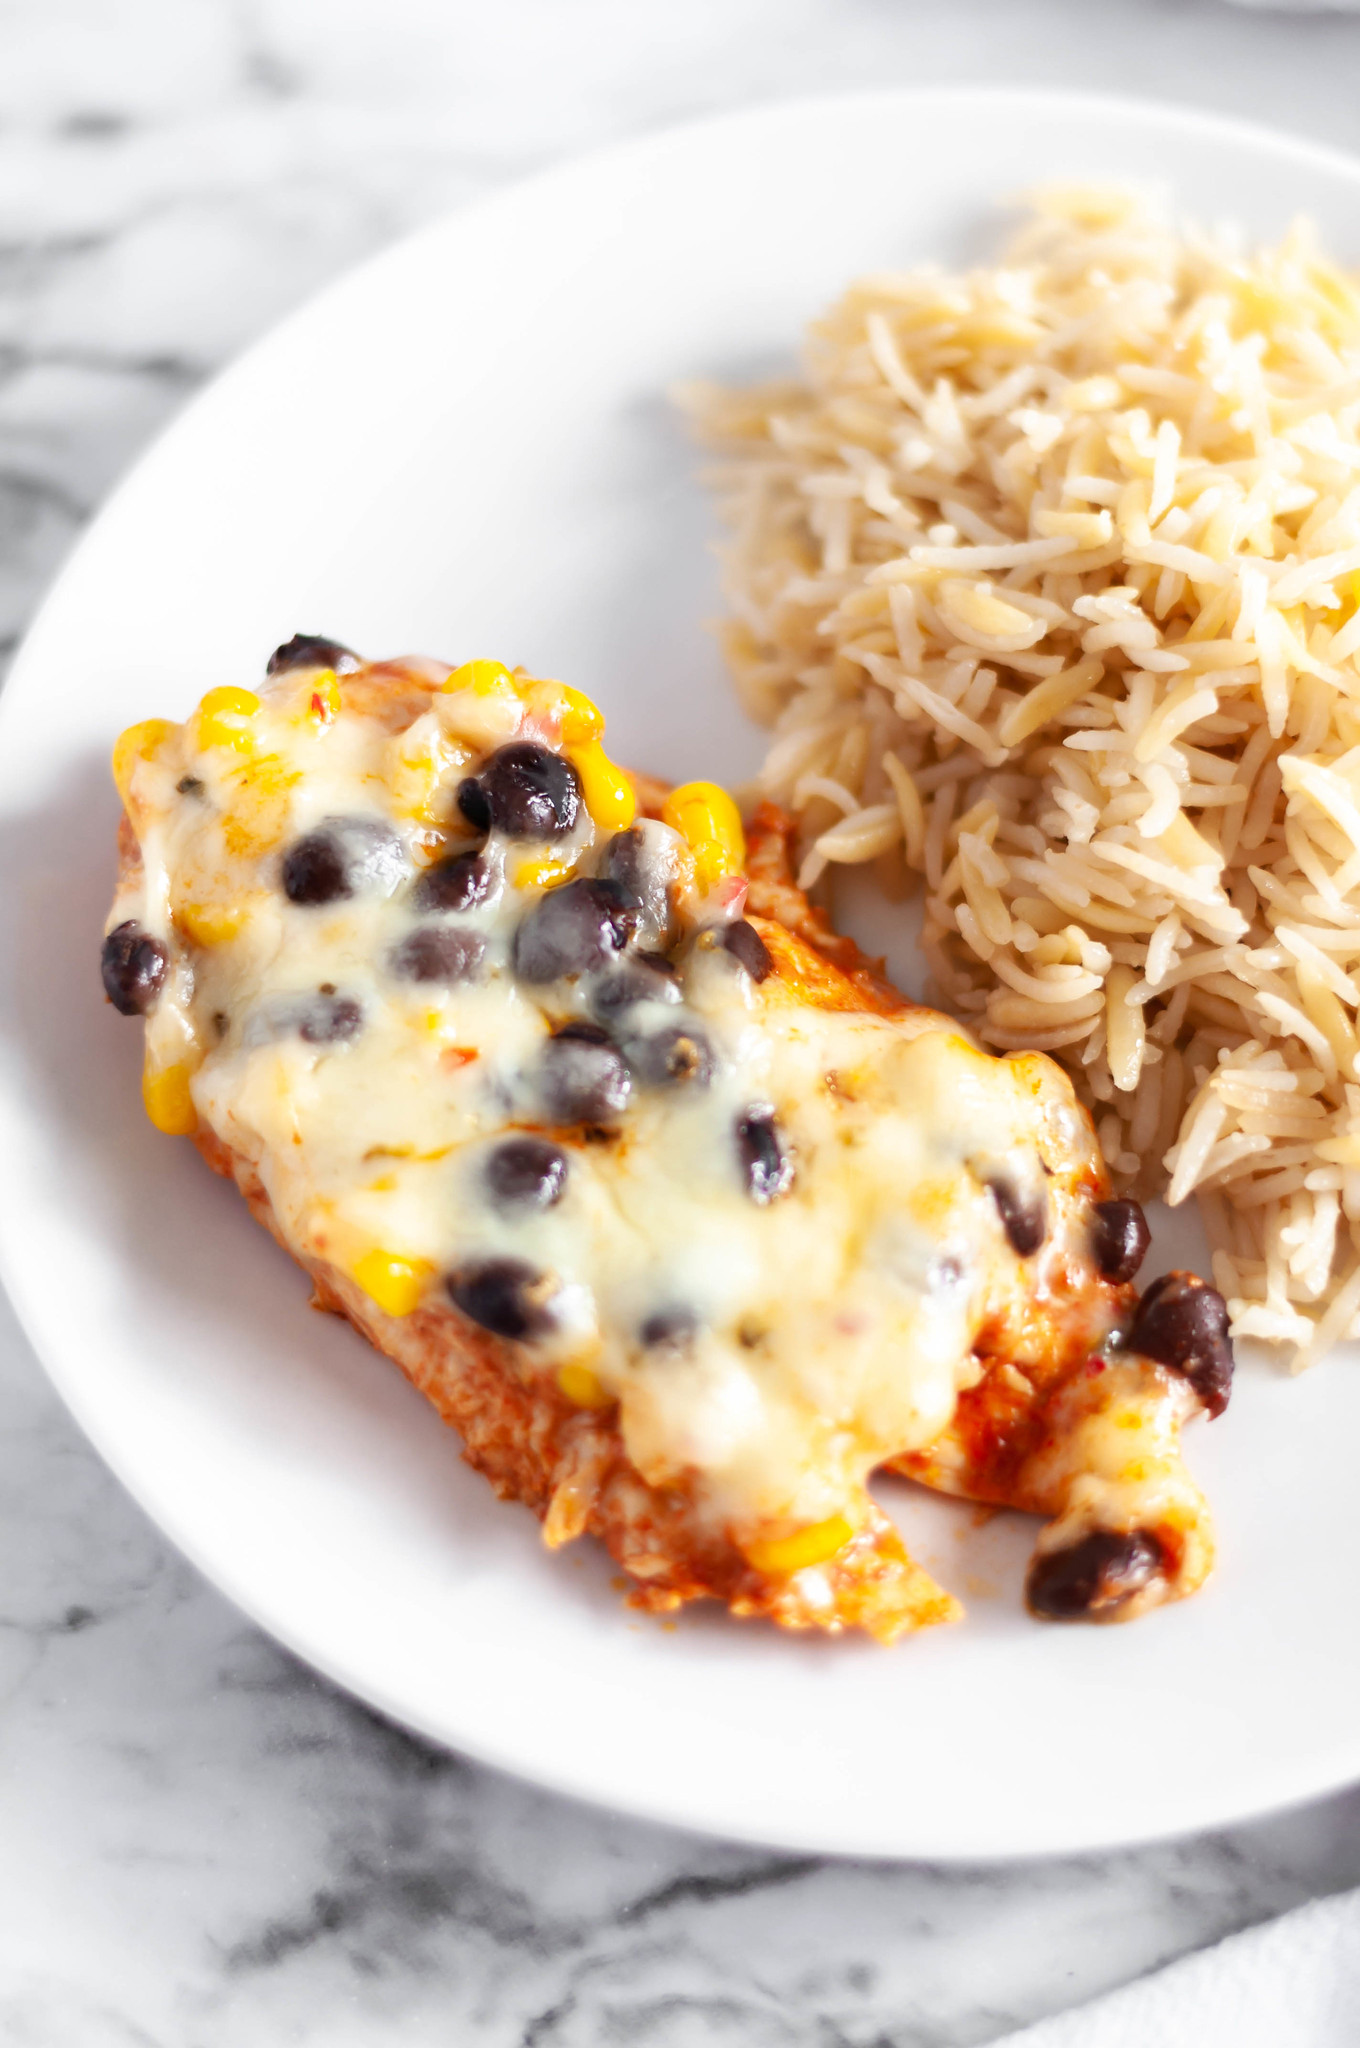 Baked Enchilada Chicken is a great addition to your 30 minute meal collection. Chicken breasts covered in enchilada sauce, corn, black beans and cheese makes a simple and healthy weeknight meal.